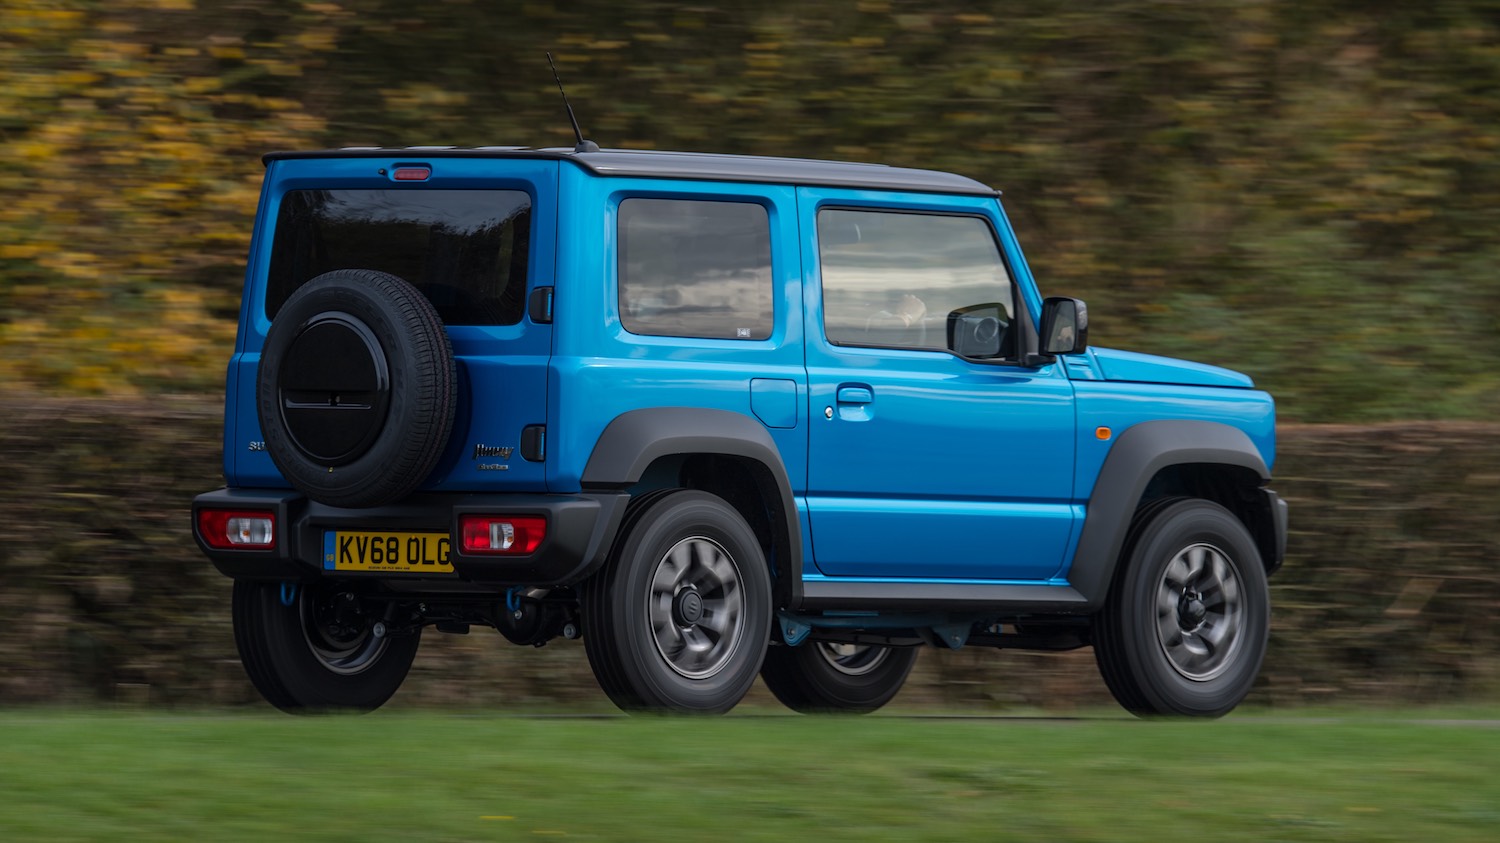 Tom Scanlan takes the All-New Jimny on and off-road 8